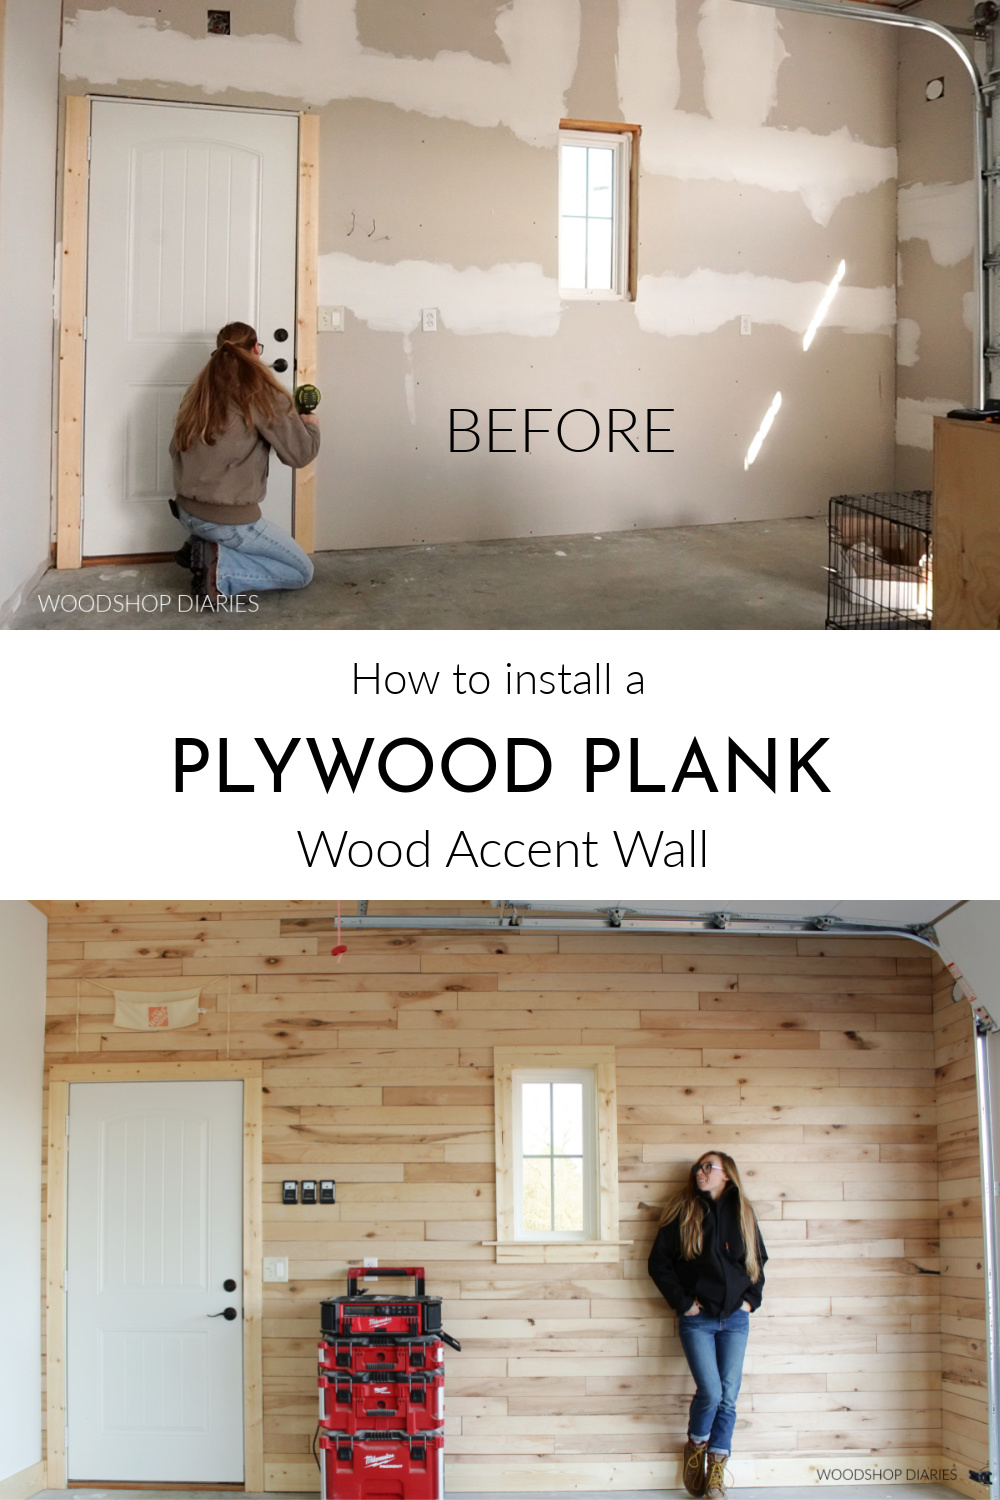 Pinterest collage image showing before wall at top and finished wood plank accent wall at bottom